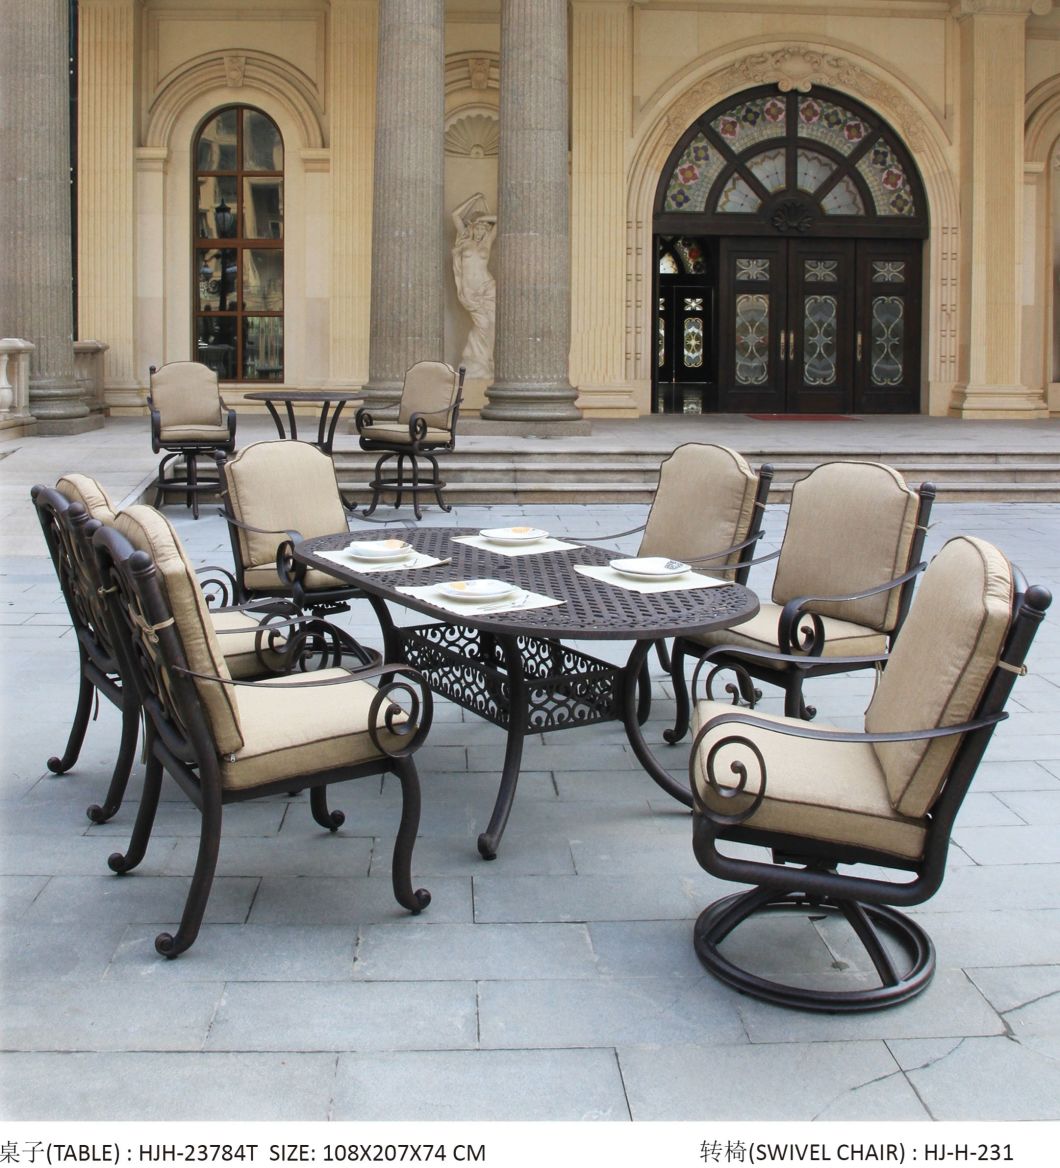 Europe Style Cast Aluminum Patio Furniture Outdoor Dining Table